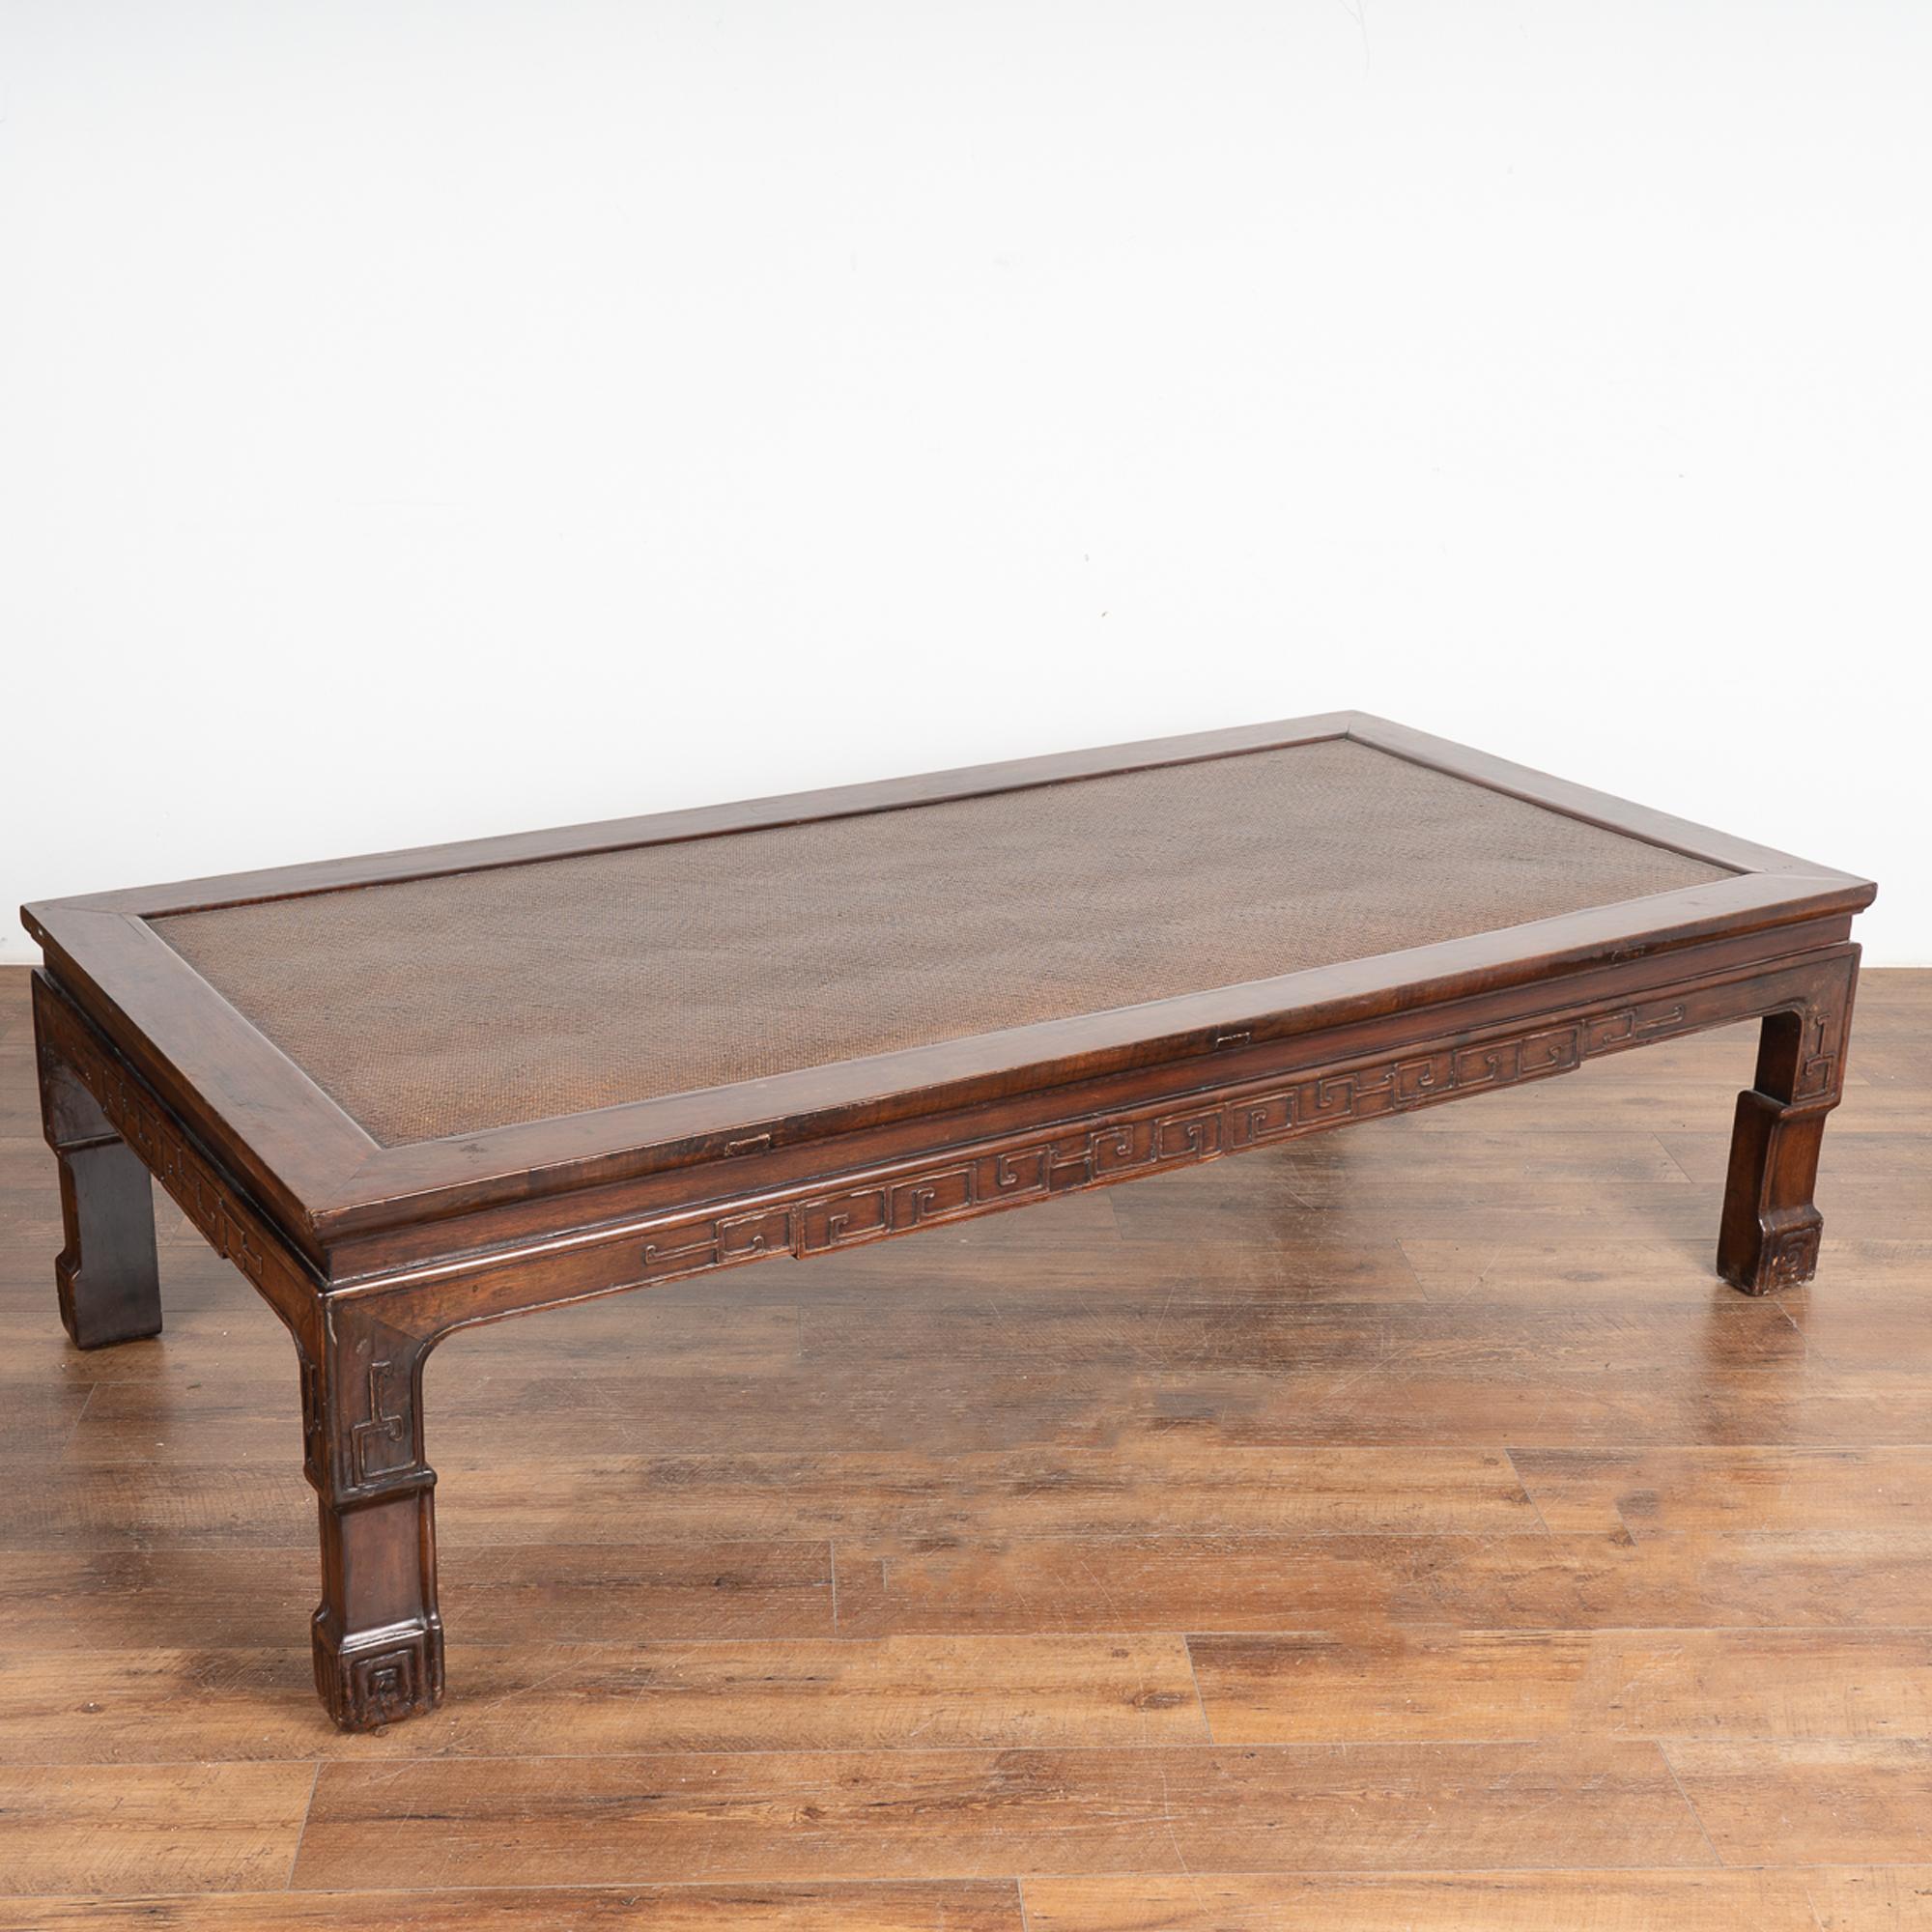 Large Chinese coffee table with carved skirt and legs with rattan top and traditional lacquered finish.
This handsome coffee table is strong, stable and ready for use. Wear related scuffs, scratches, minor separation (at corners) are a reflection of